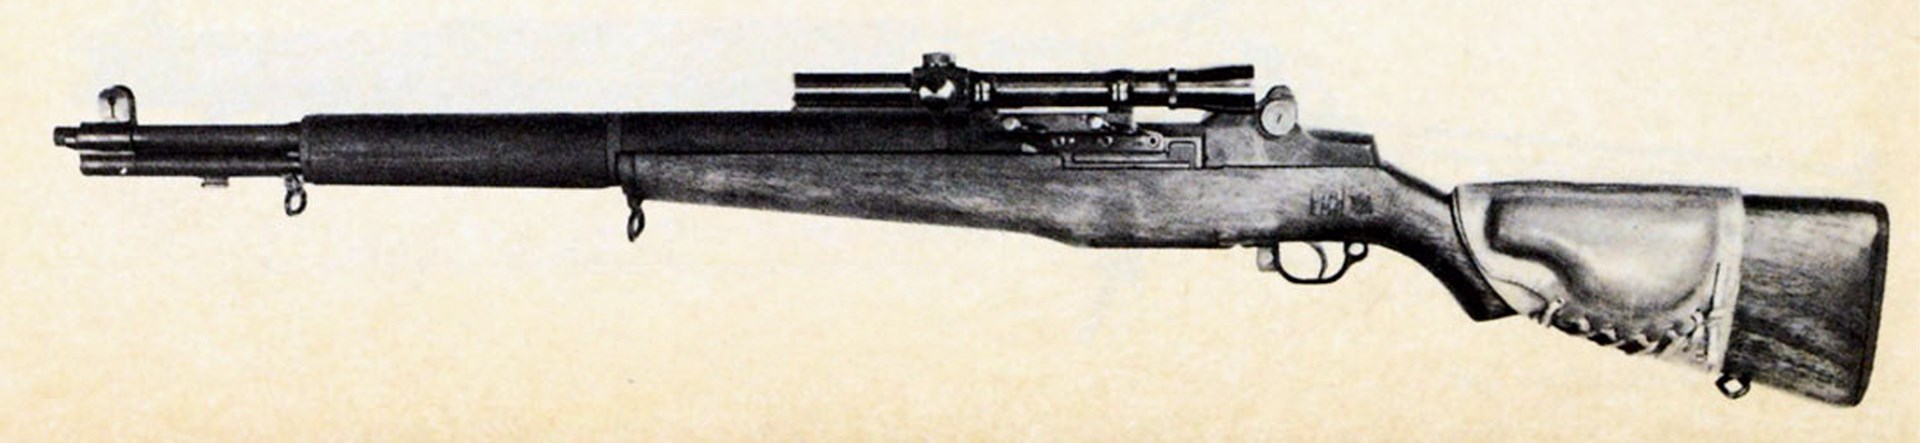 U.S. Rifle Cal. .30 M1C left-side view shown with cheek pad and riflescope